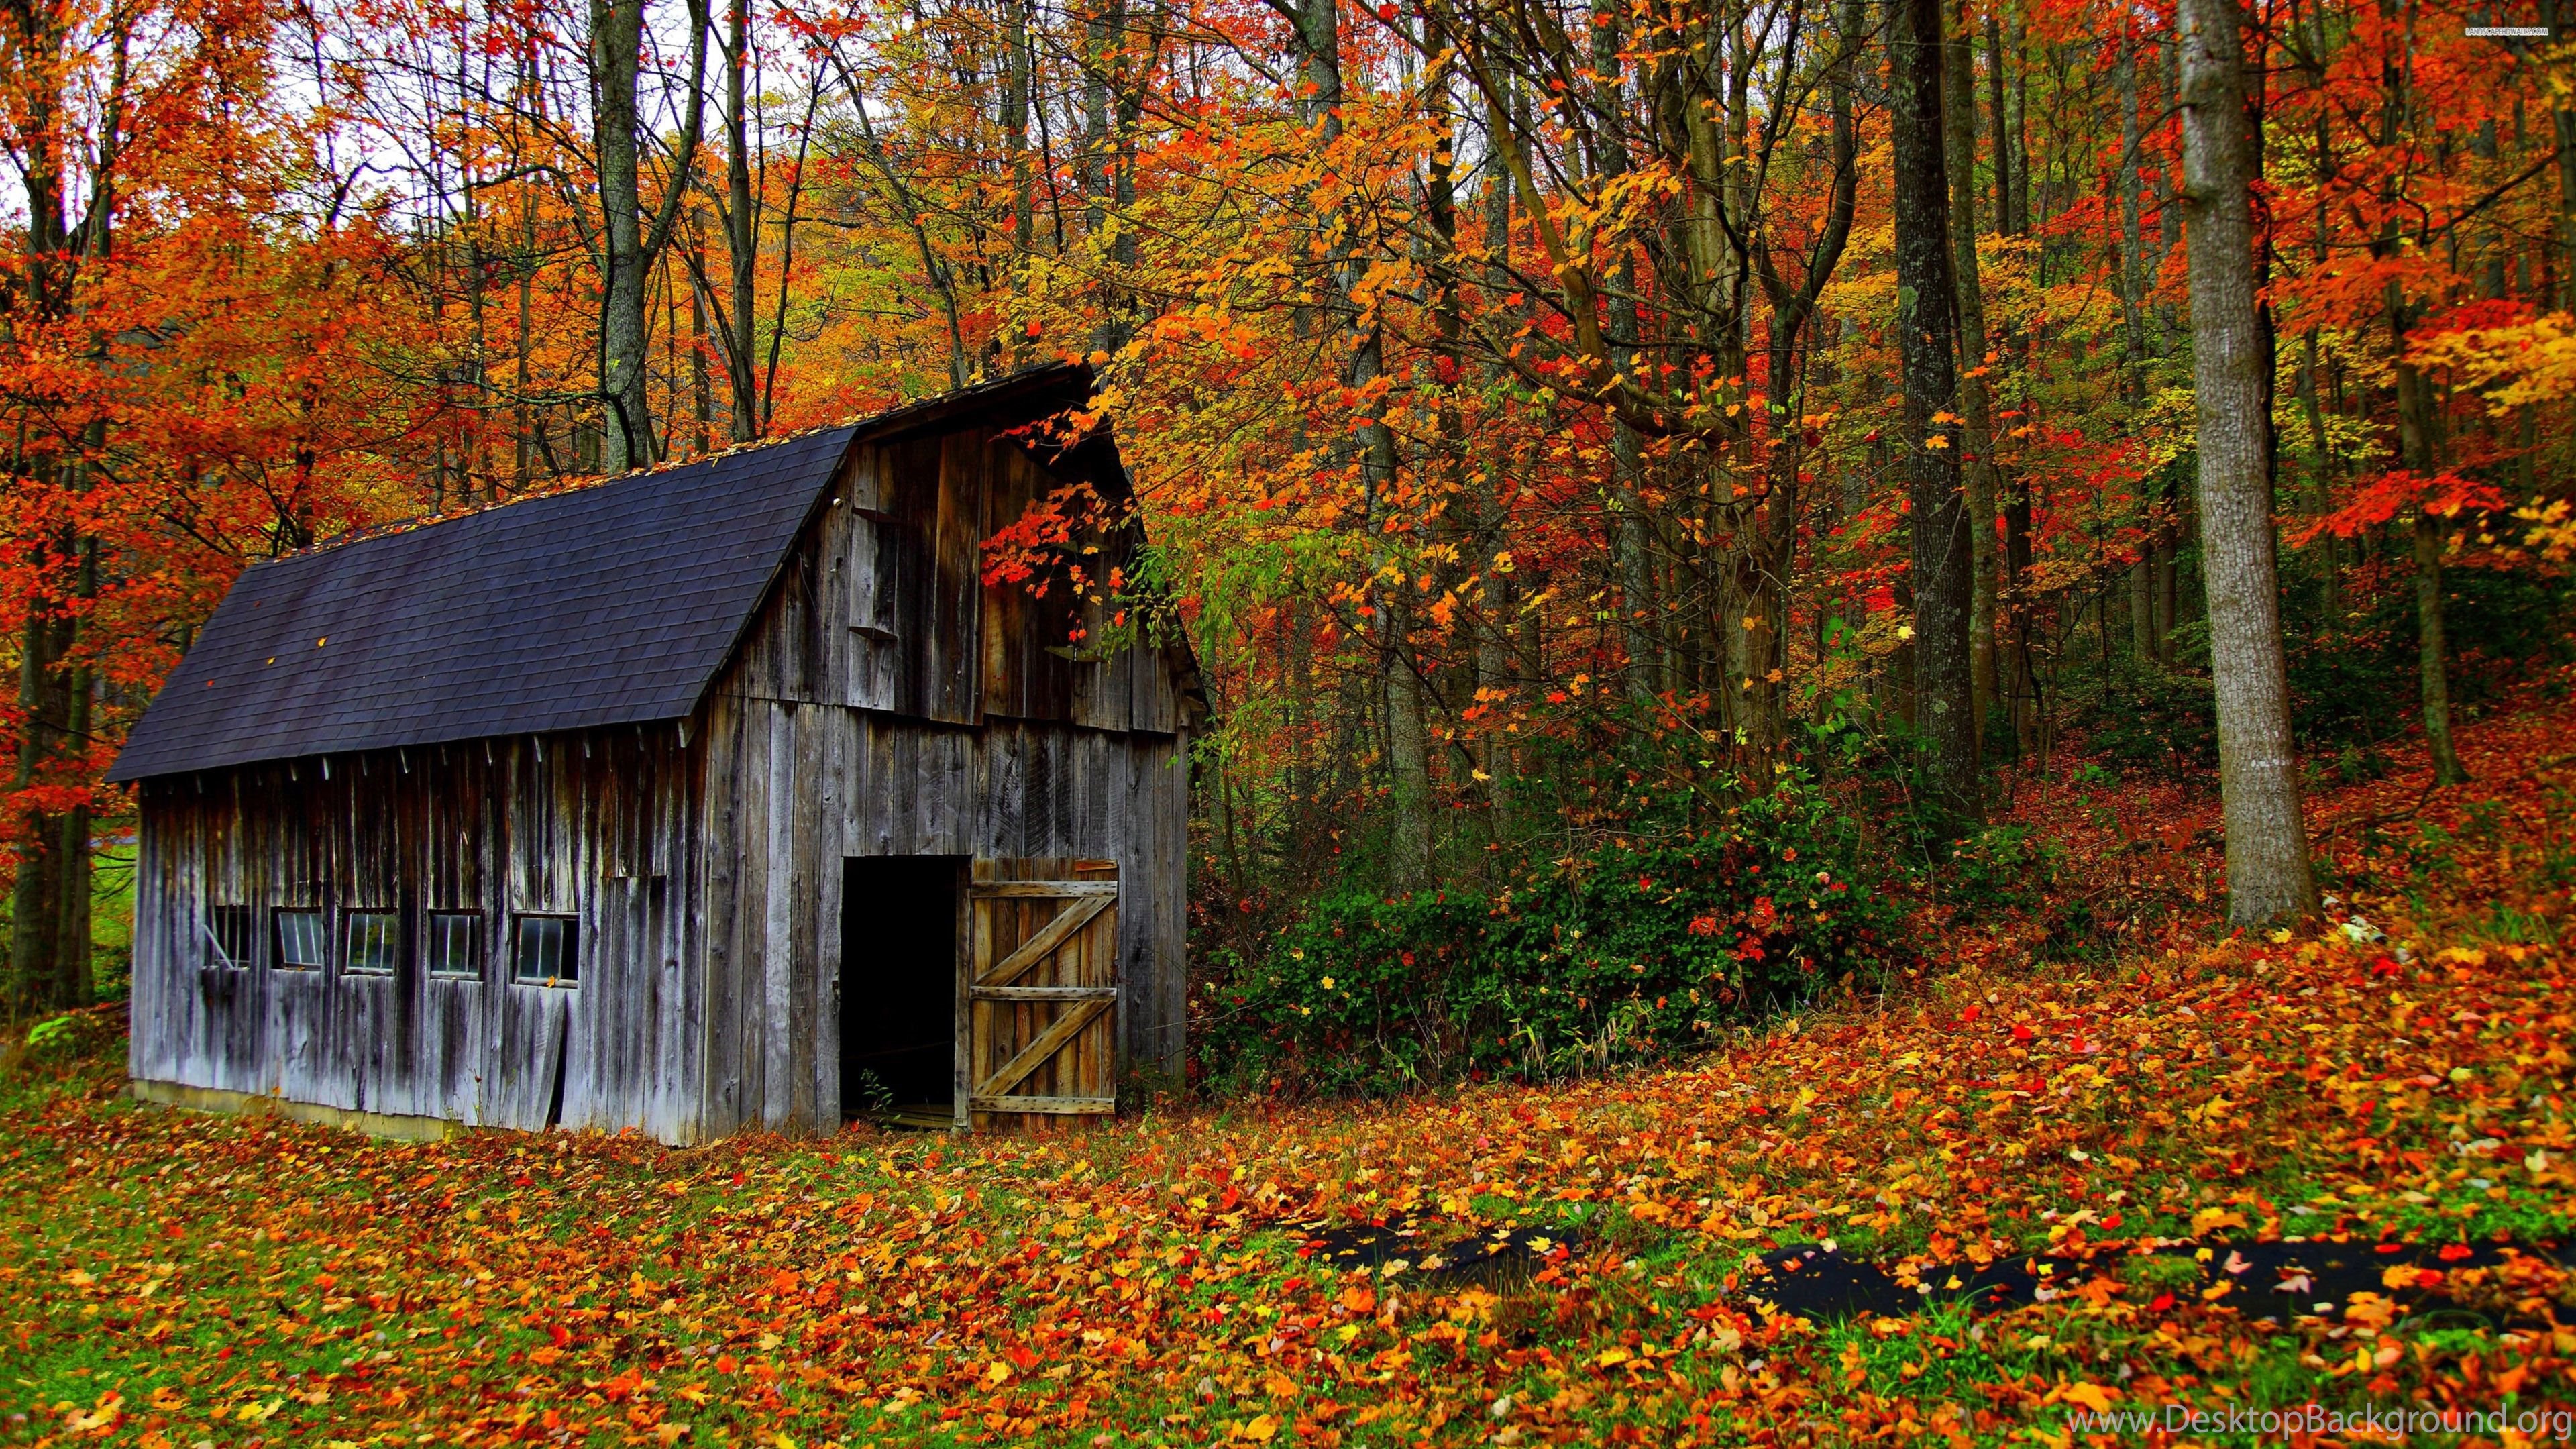 Old Barn In The Colorful Forest Wallpaper Desktop Background